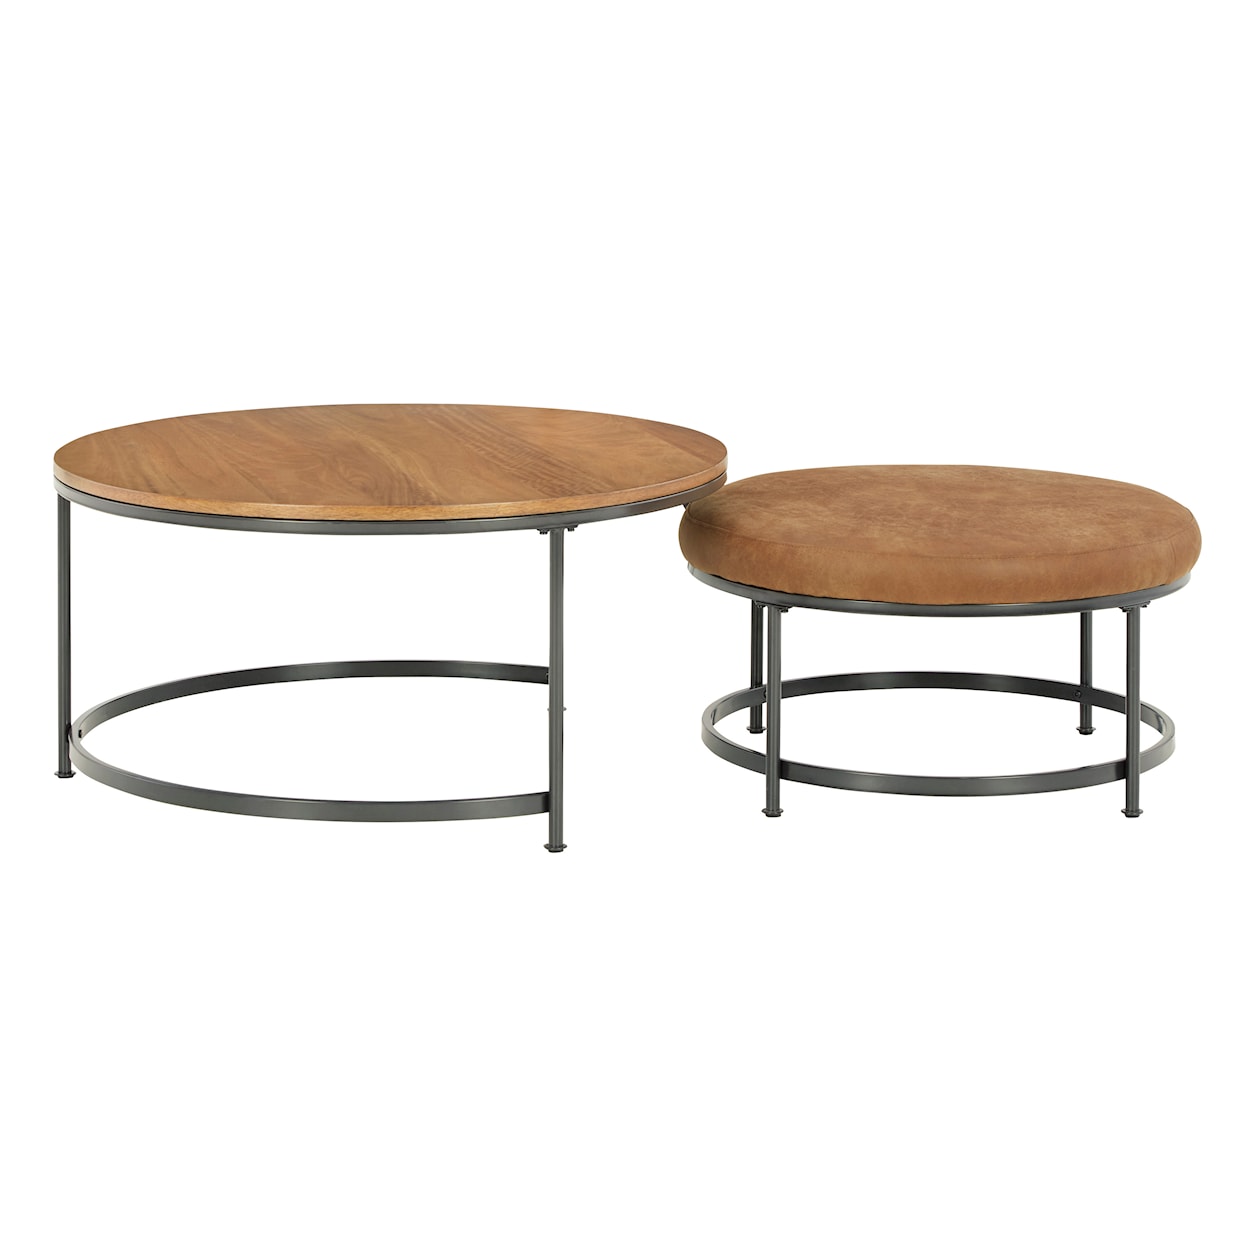 Signature Design by Ashley Drezmoore Nesting Coffee Table (Set of 2)